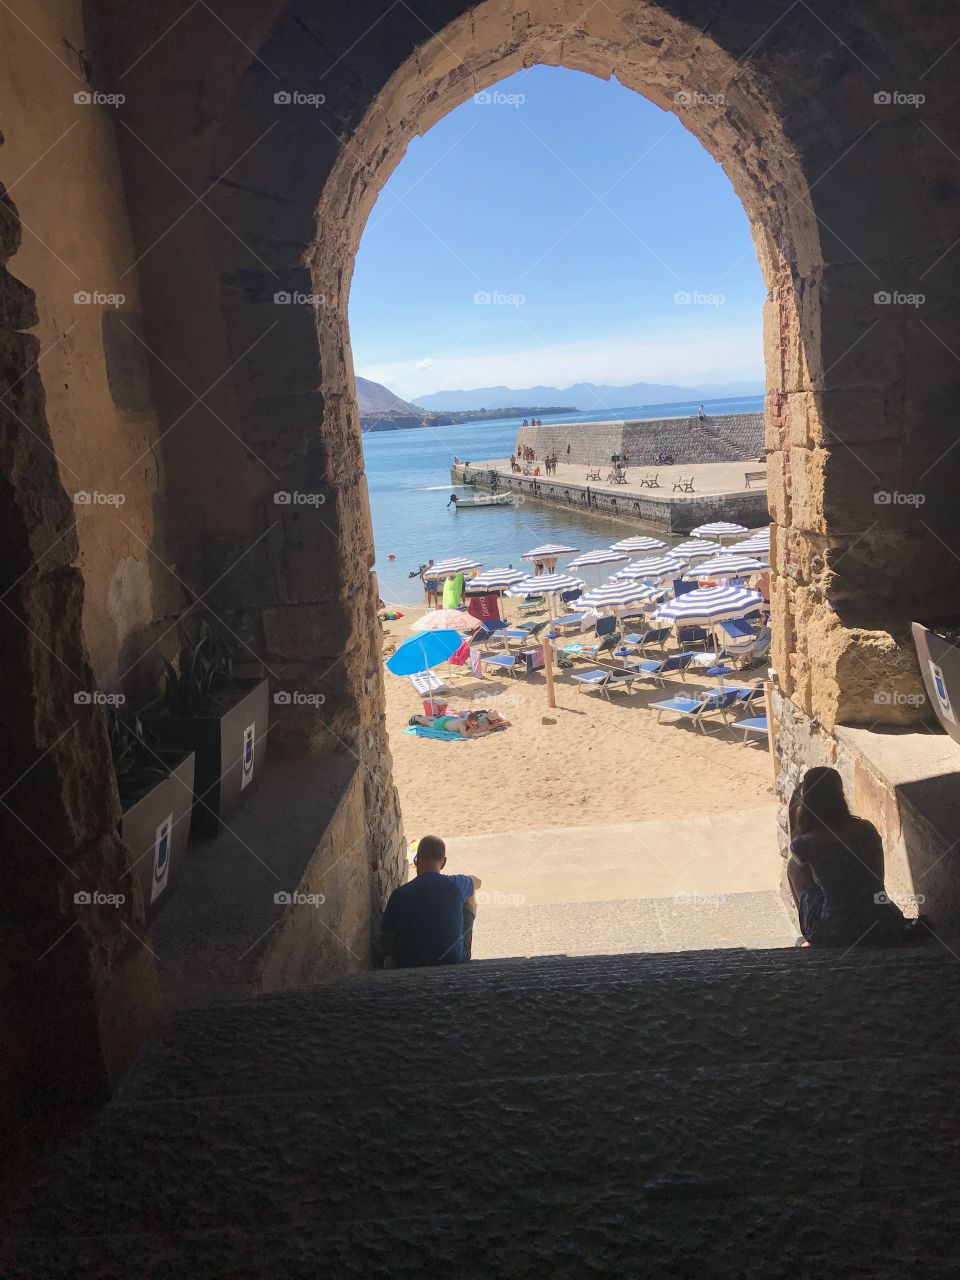 Sitting in the shade/Cefalu Italy